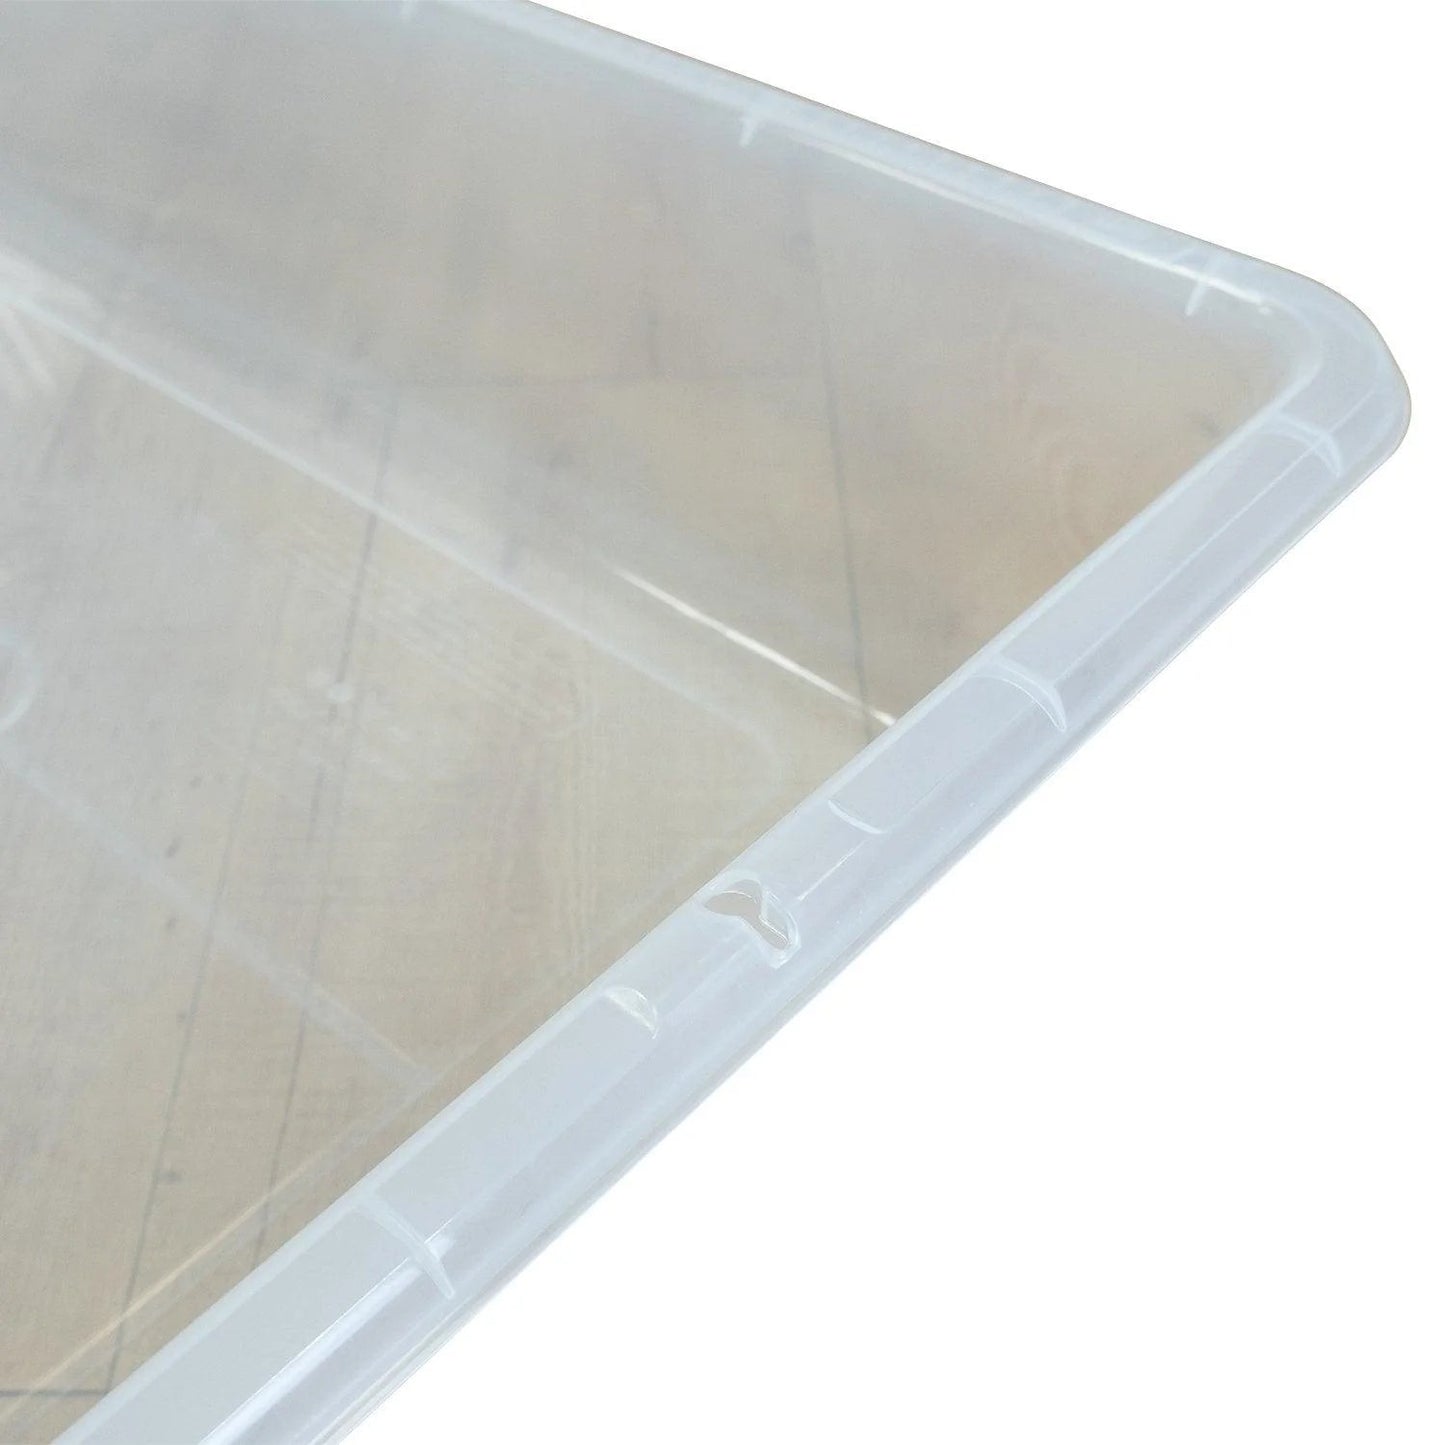 Edx Education - Desk Top Water Tray - Translucent - Playlaan